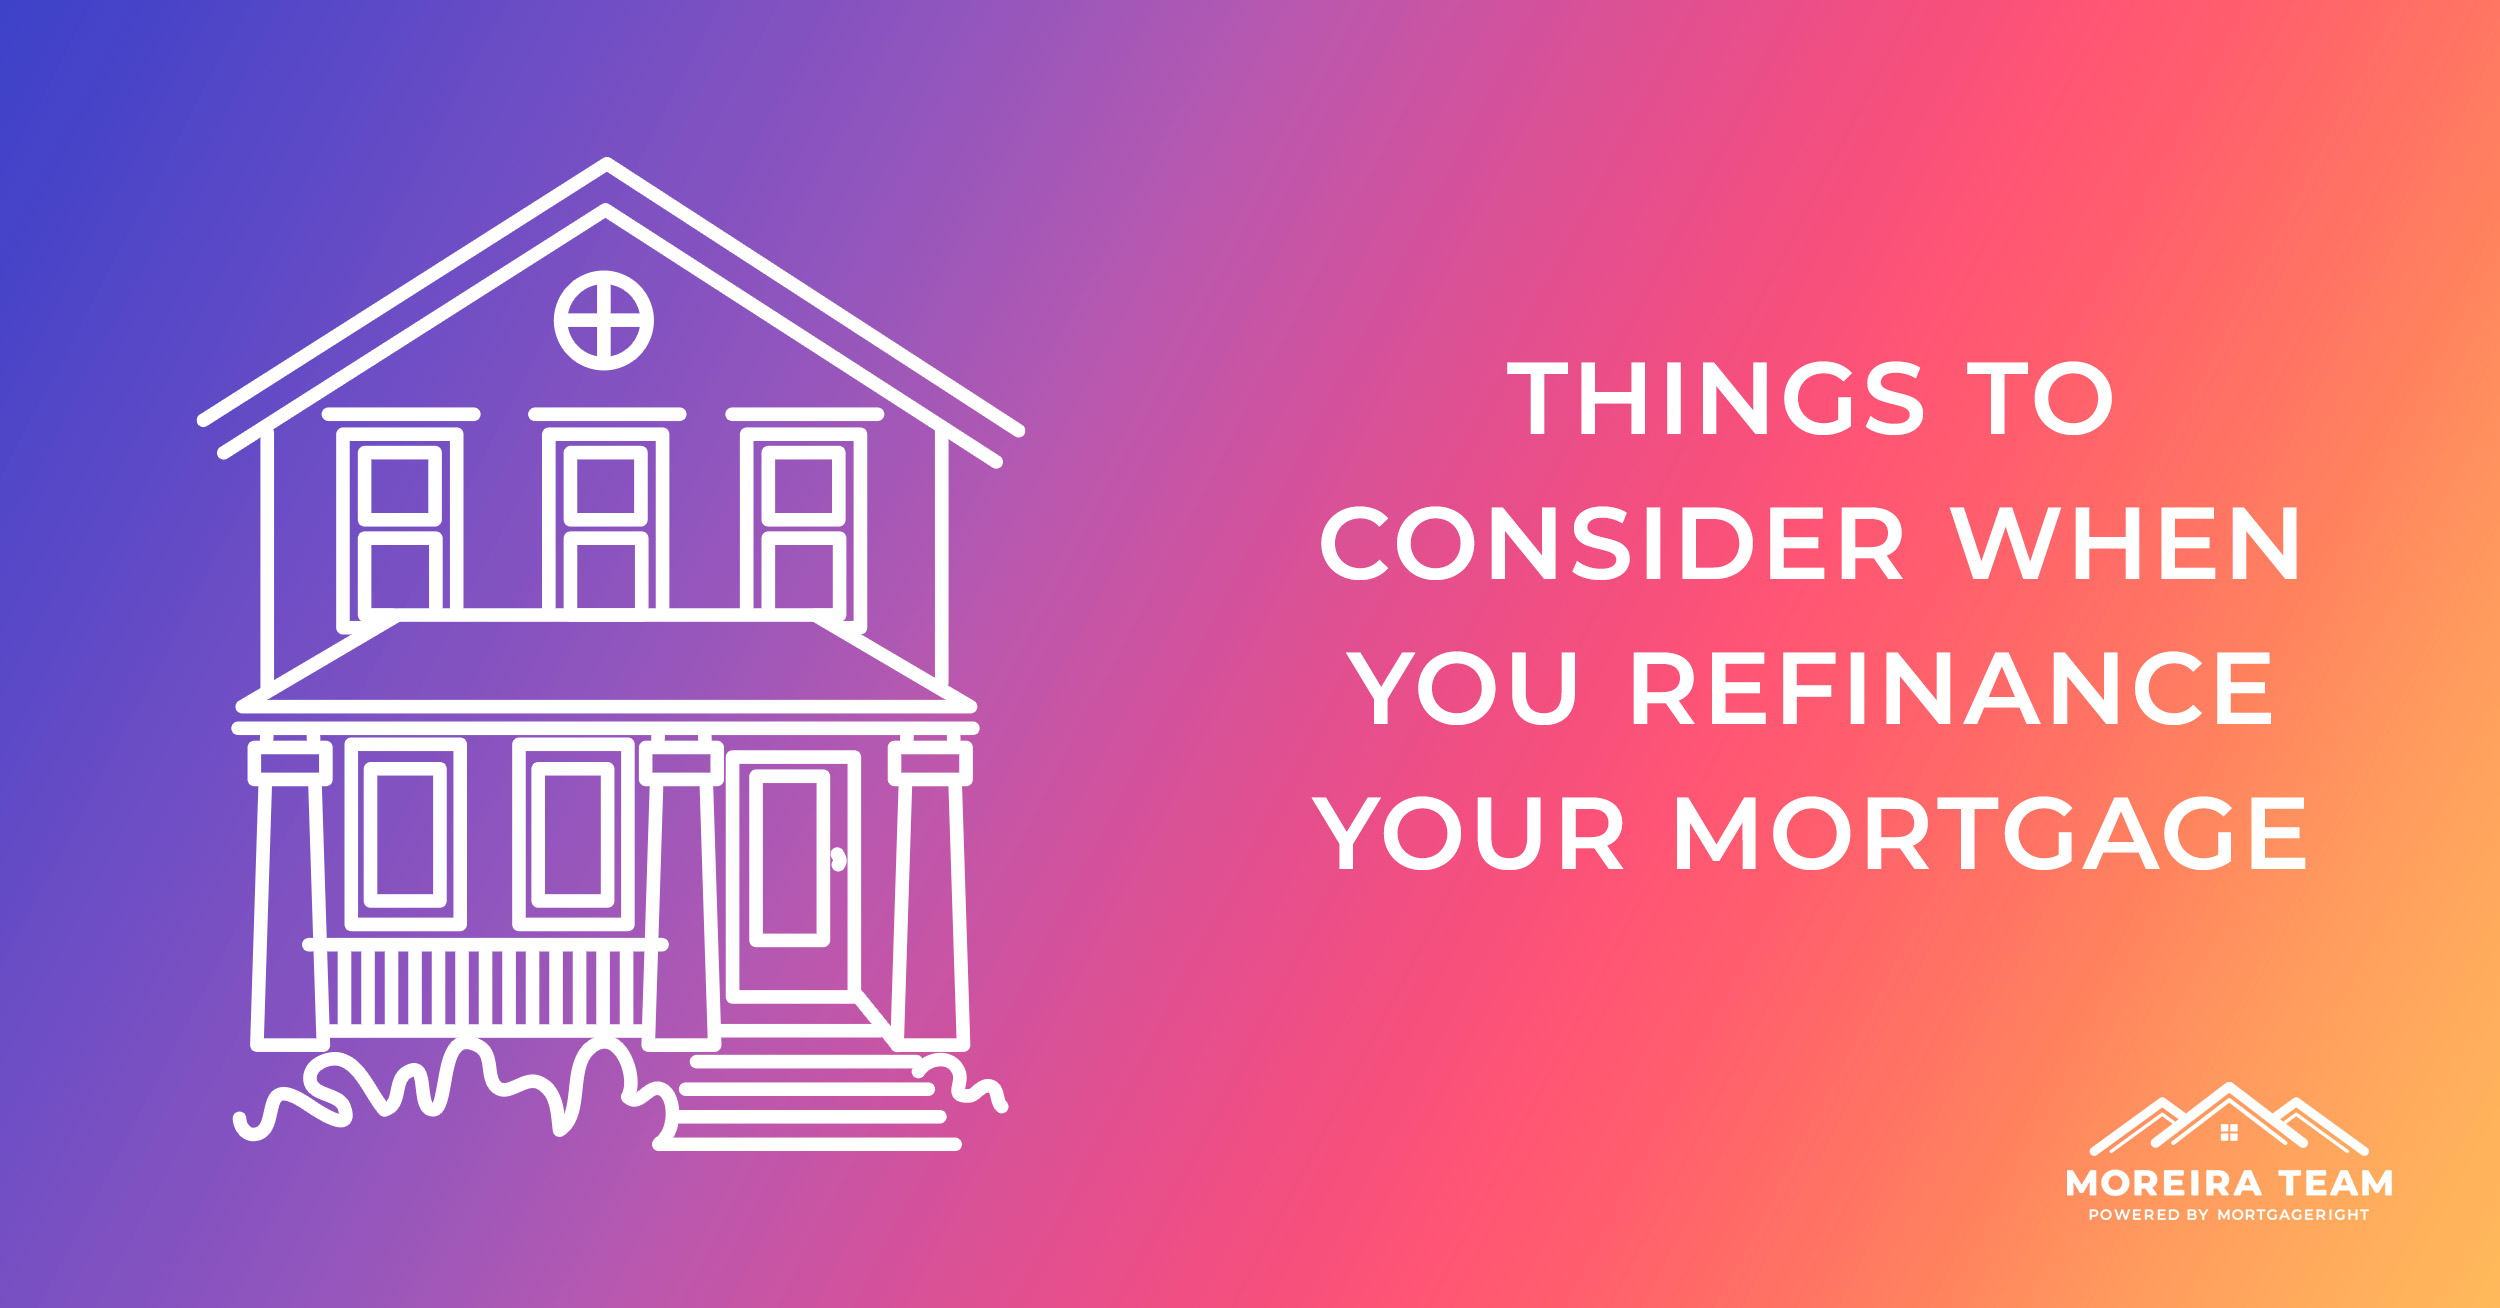 Things to Consider When You Refinance Your Mortgage